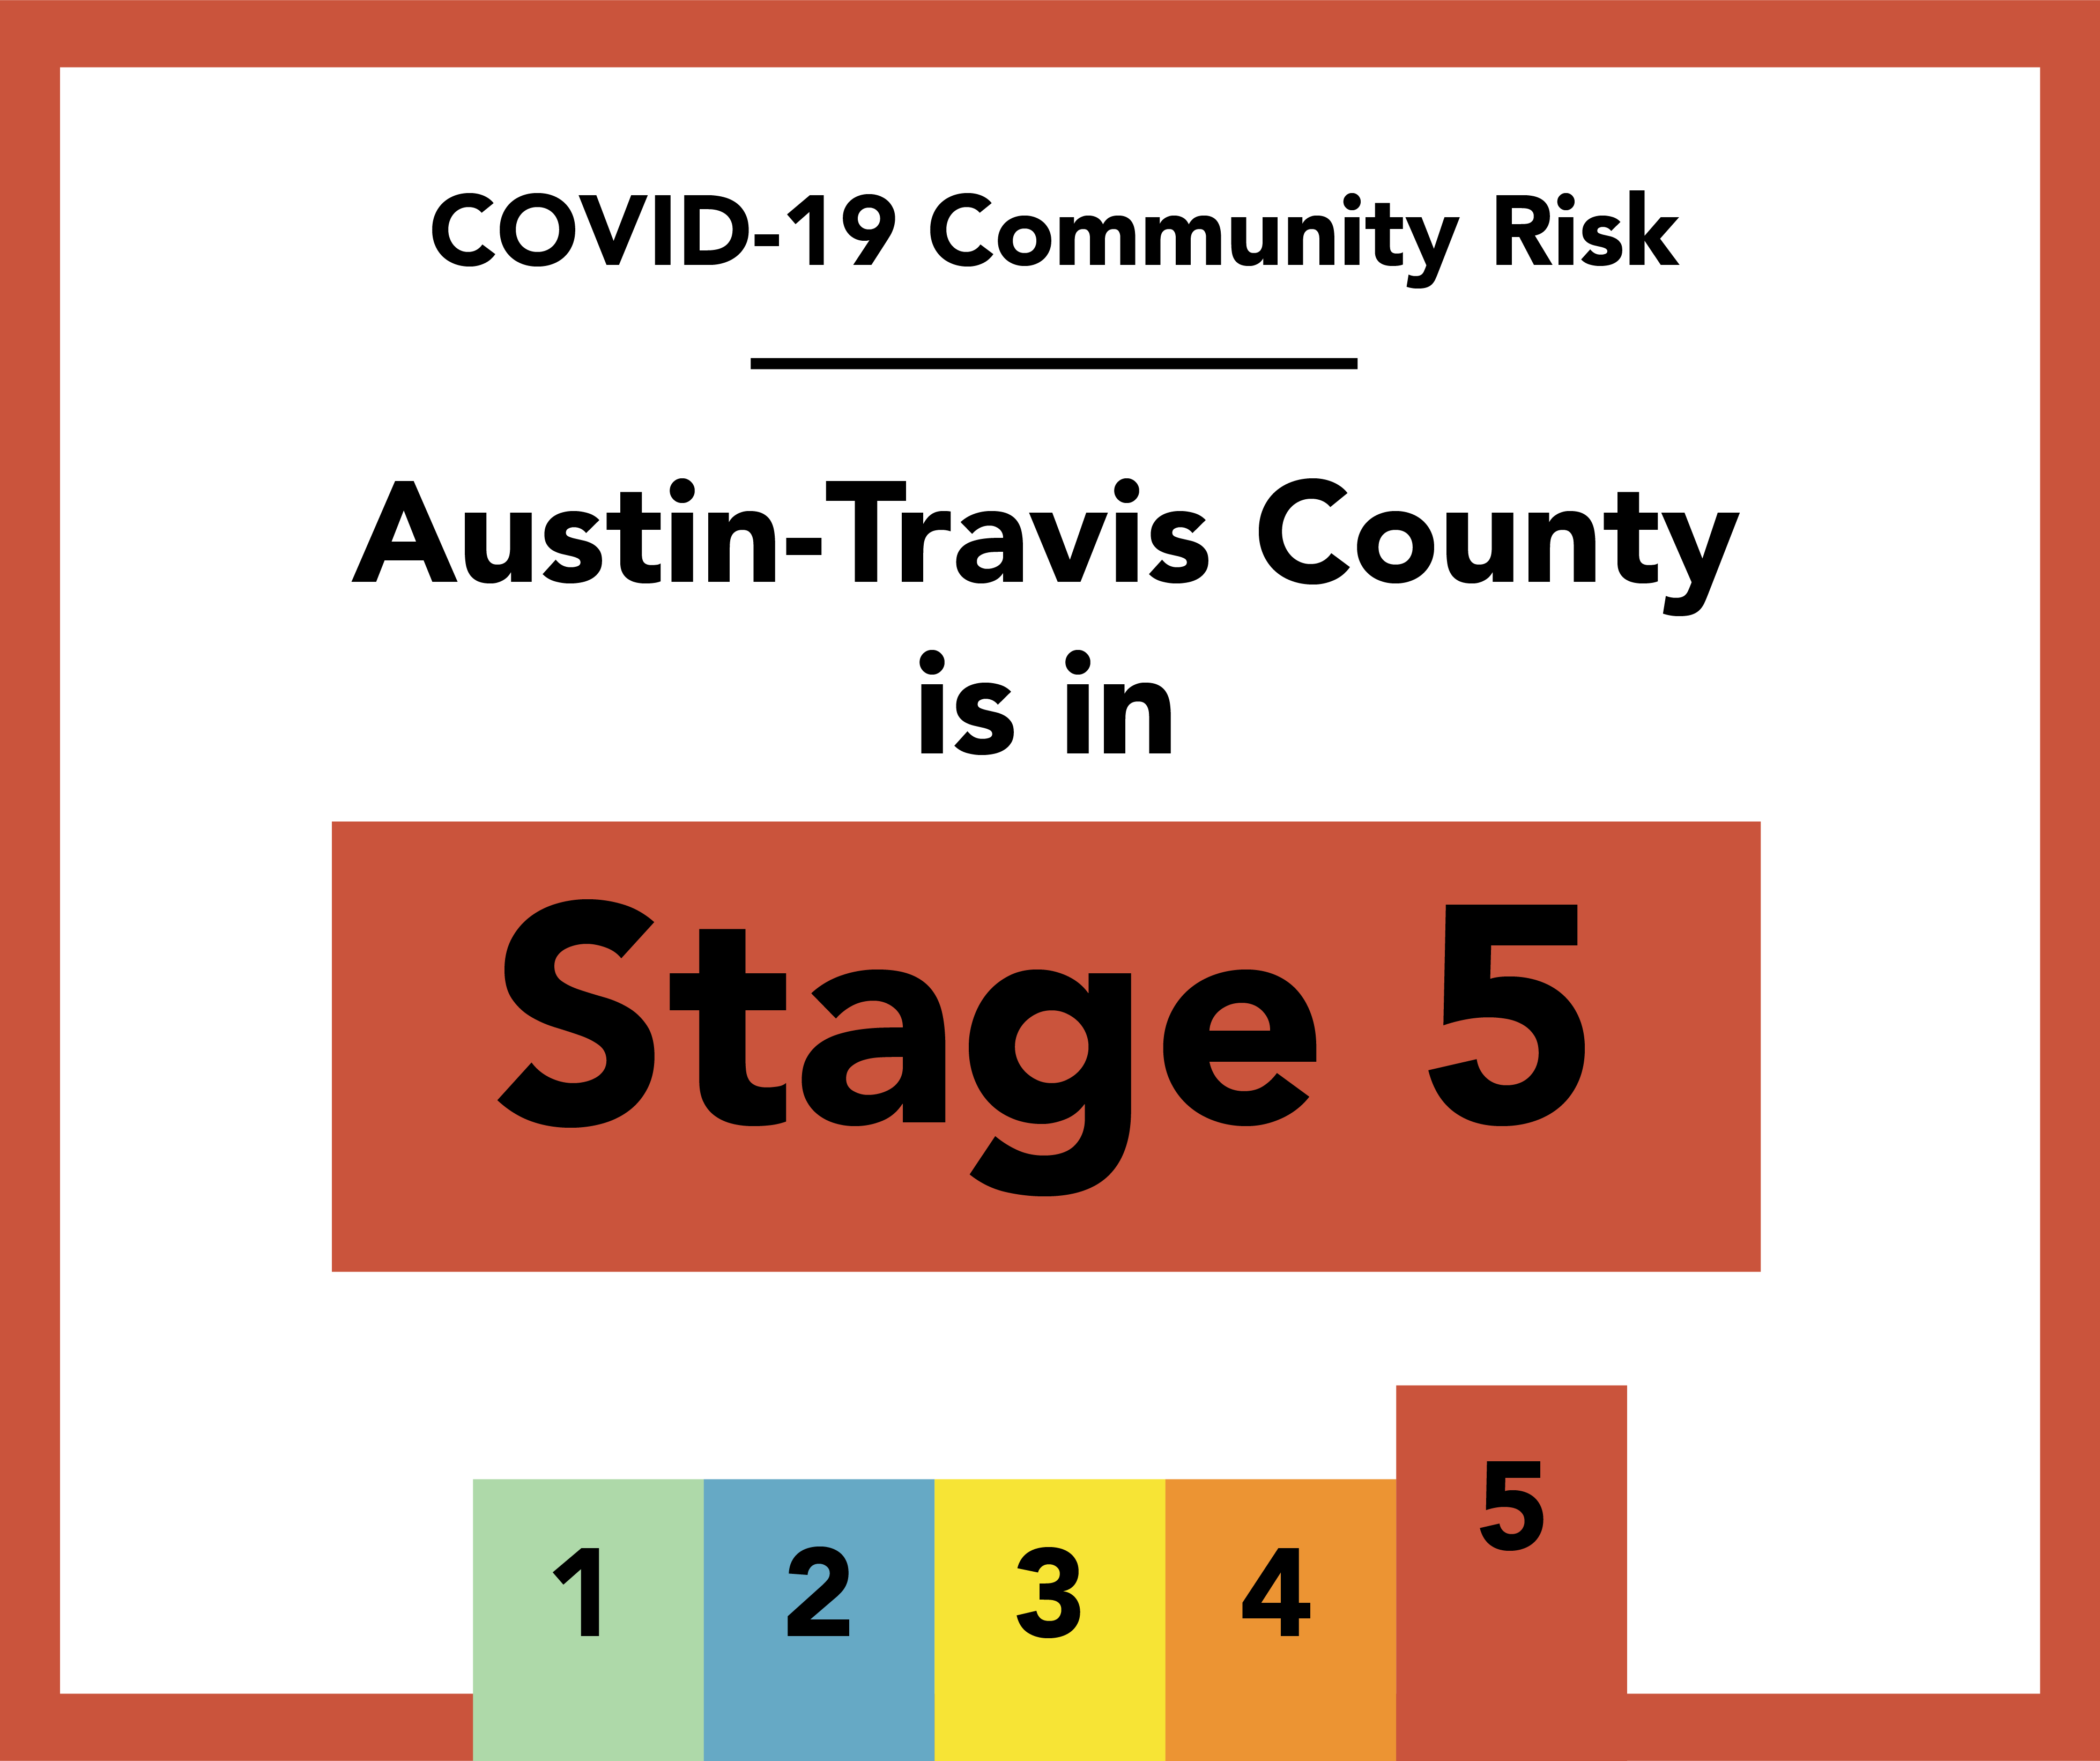 Austin-Travis County is in Stage 5 of Five Stages